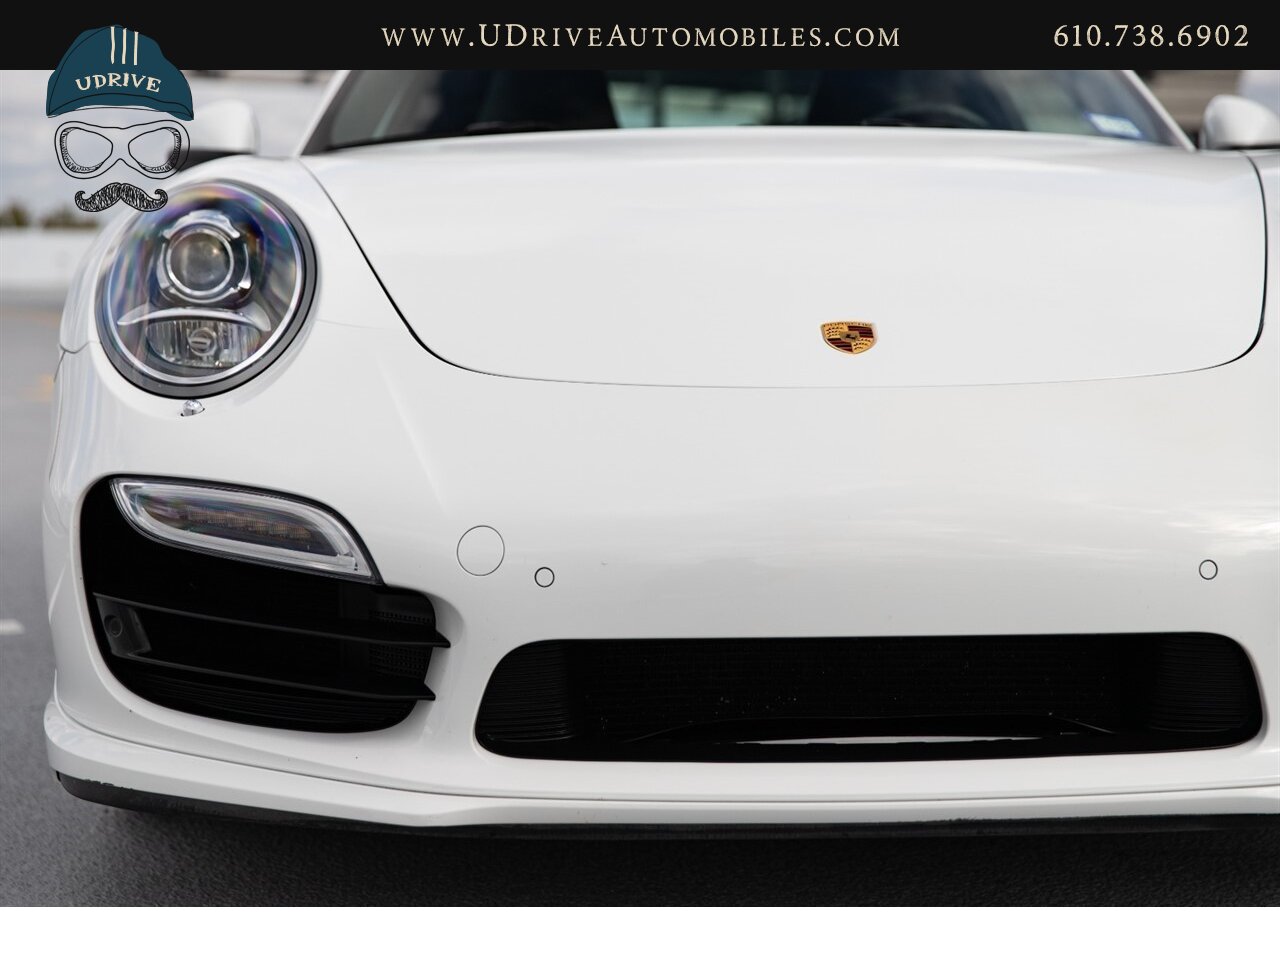 2014 Porsche 911 Turbo 12k Miles White over Black Chrono Rear Wiper  Sport Seats 20in Turbo Whls Sunroof Red Belts - Photo 12 - West Chester, PA 19382